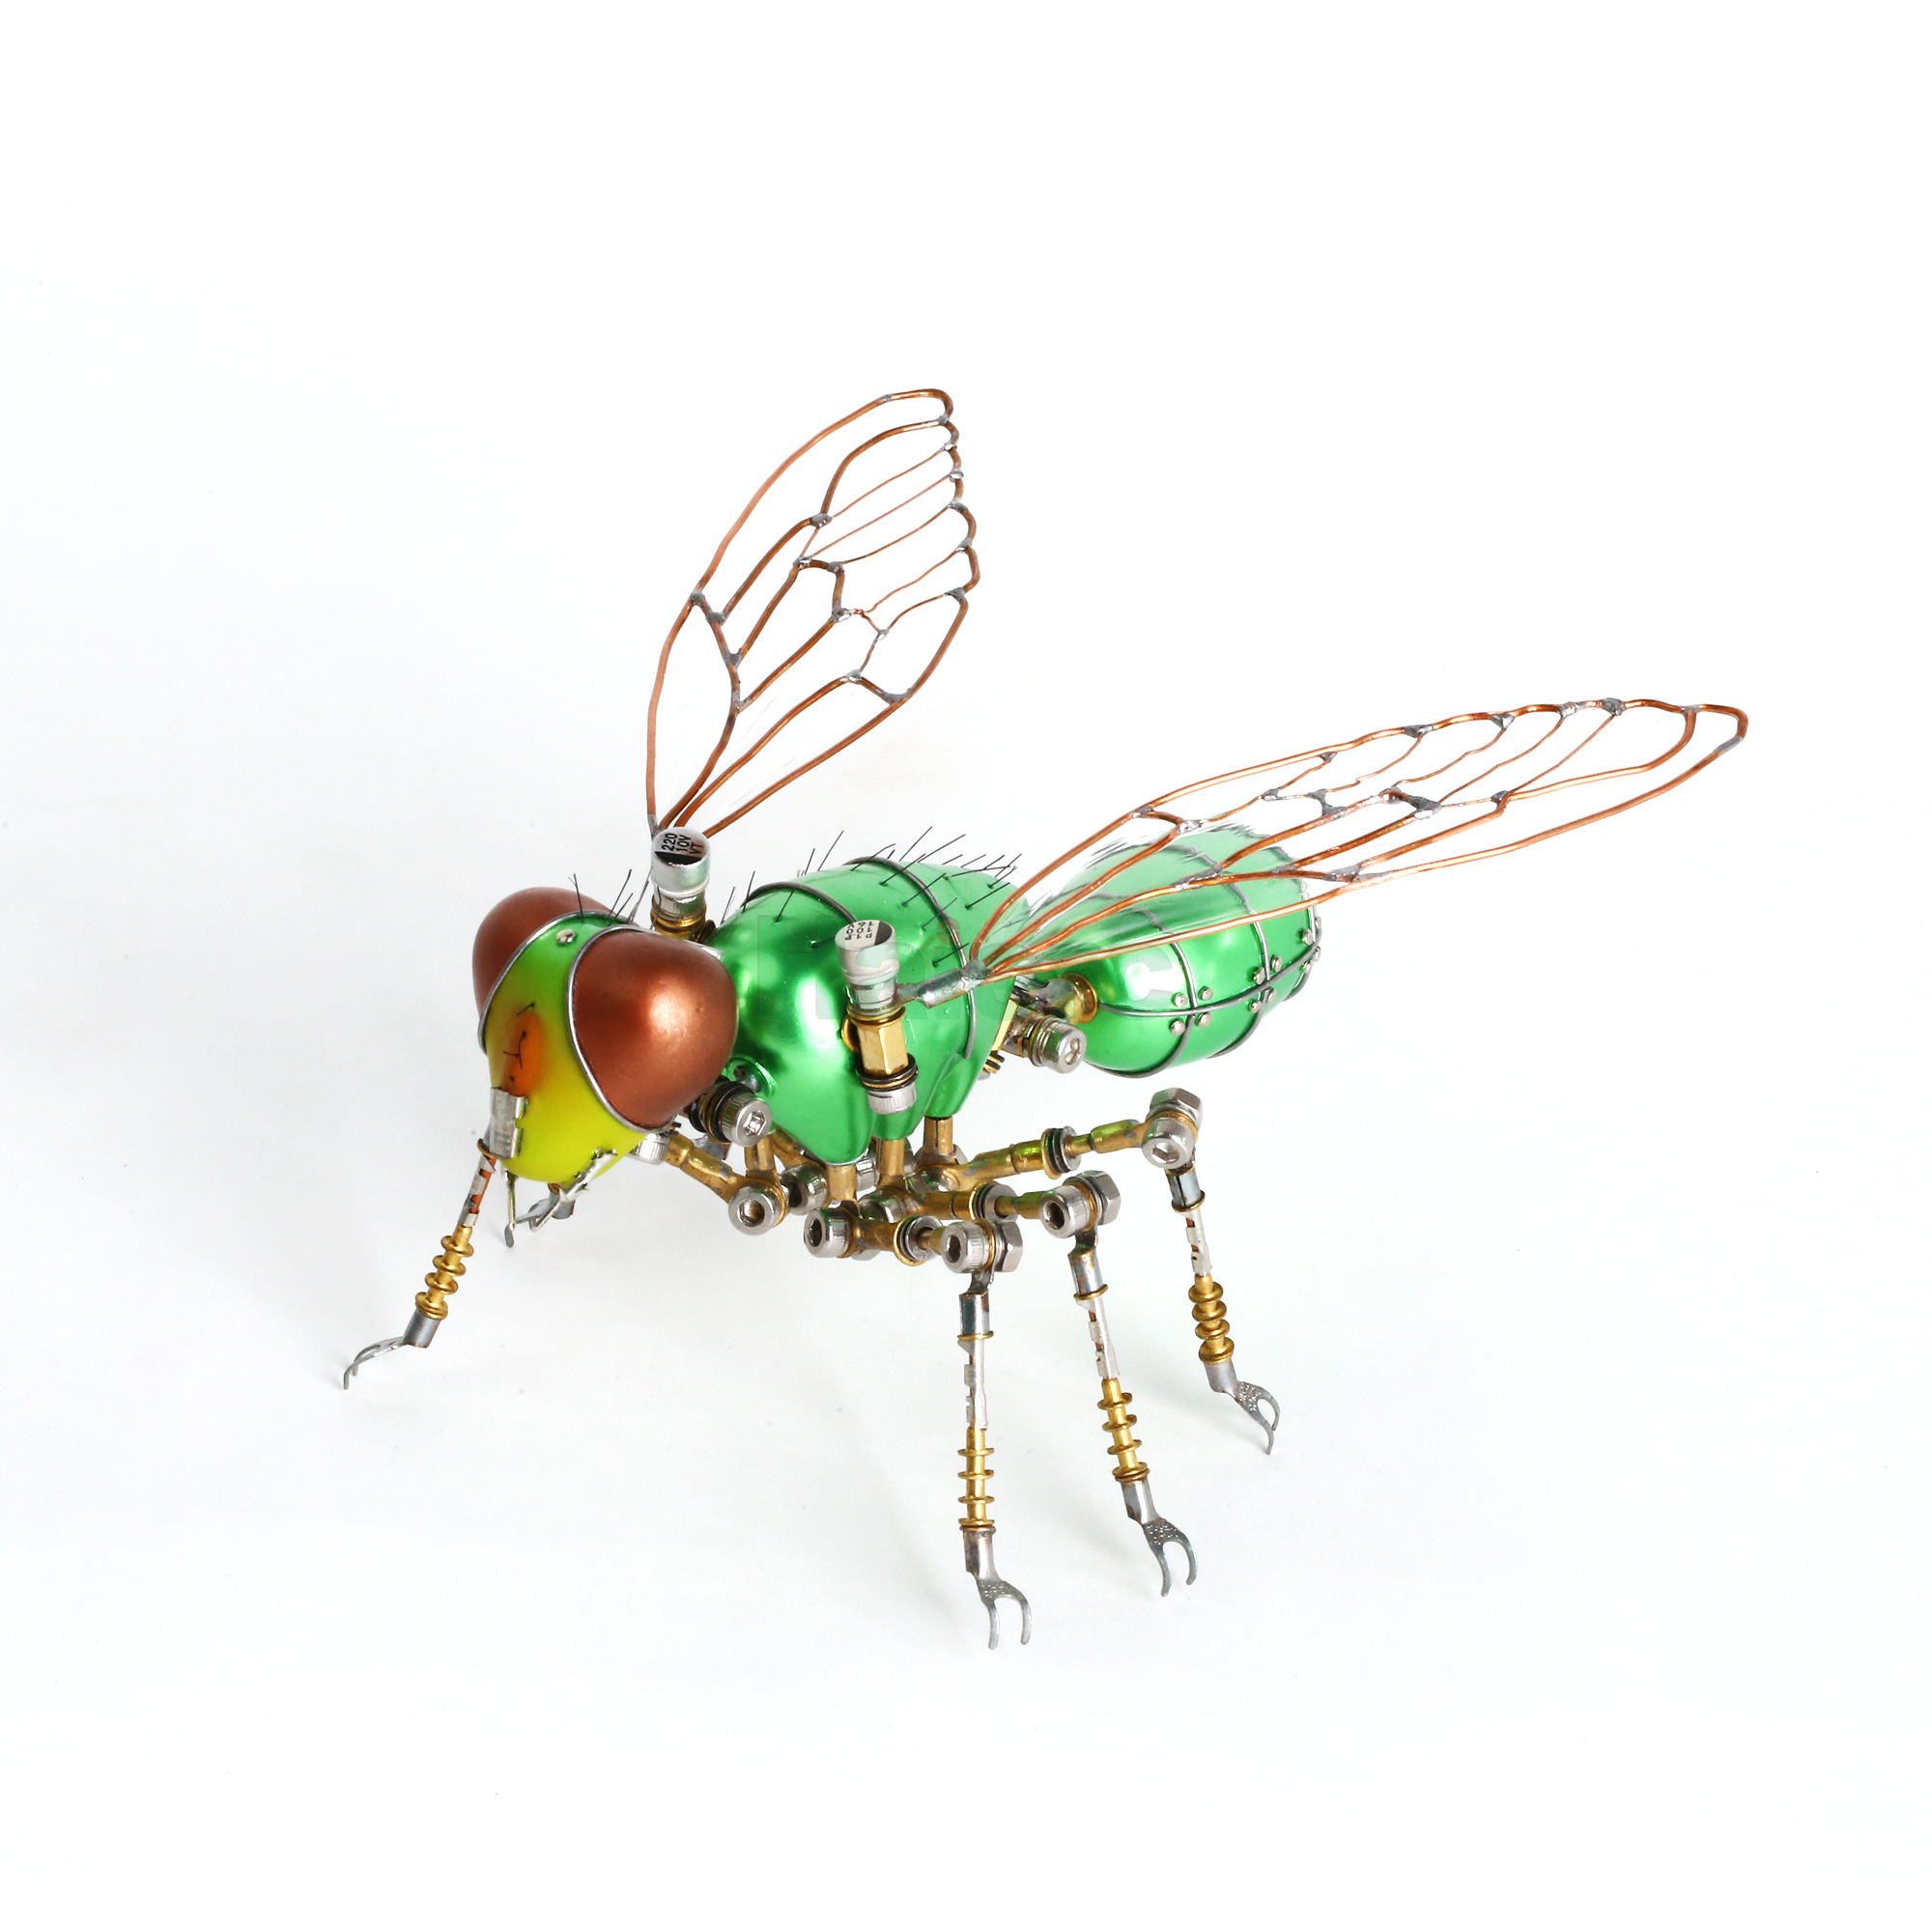 >Haierc wholesale Insect mode fly cute spoof solid fly model